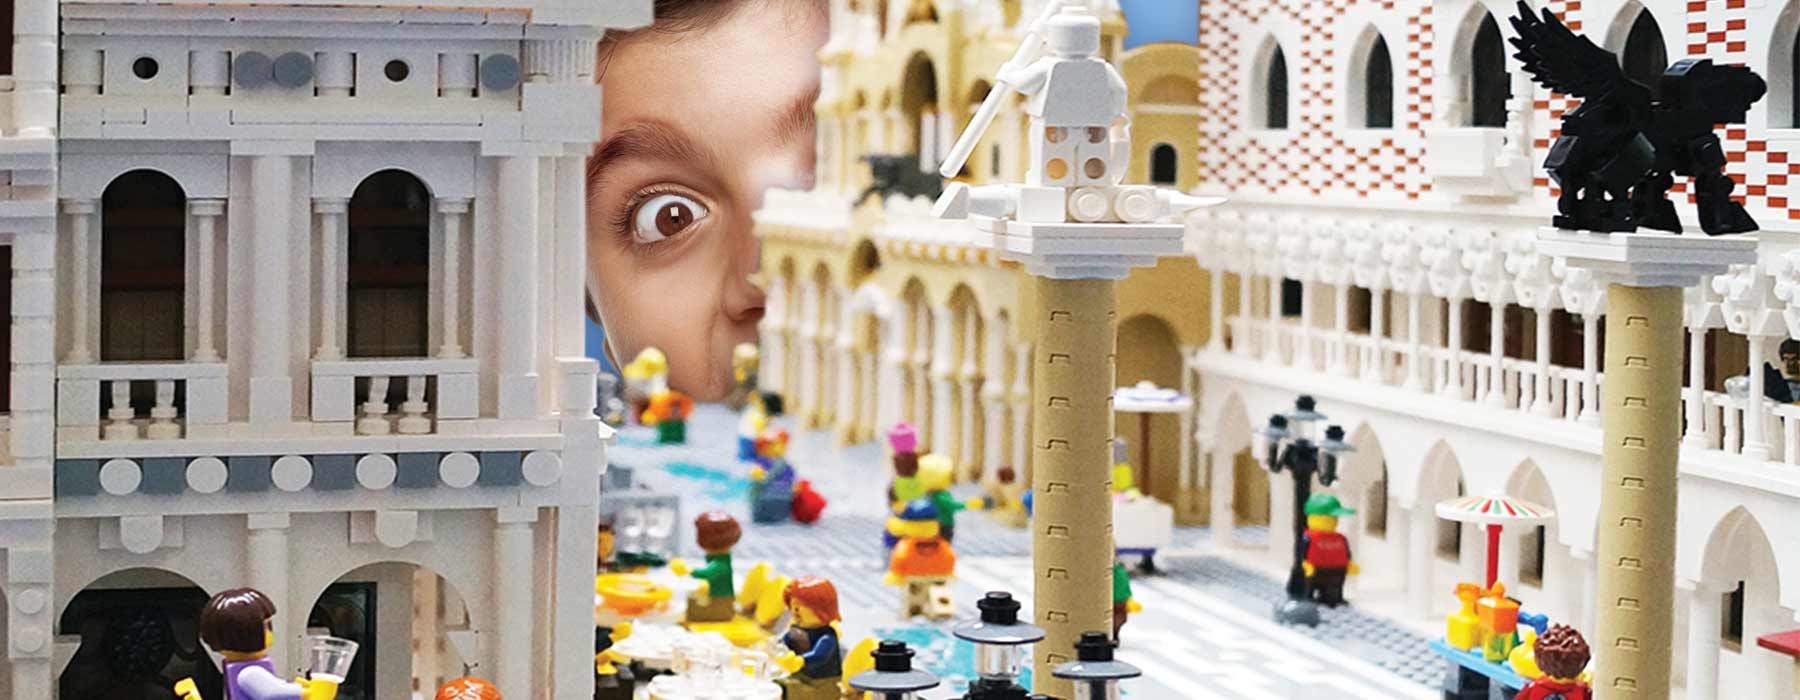 A boy looks at a LEGO town